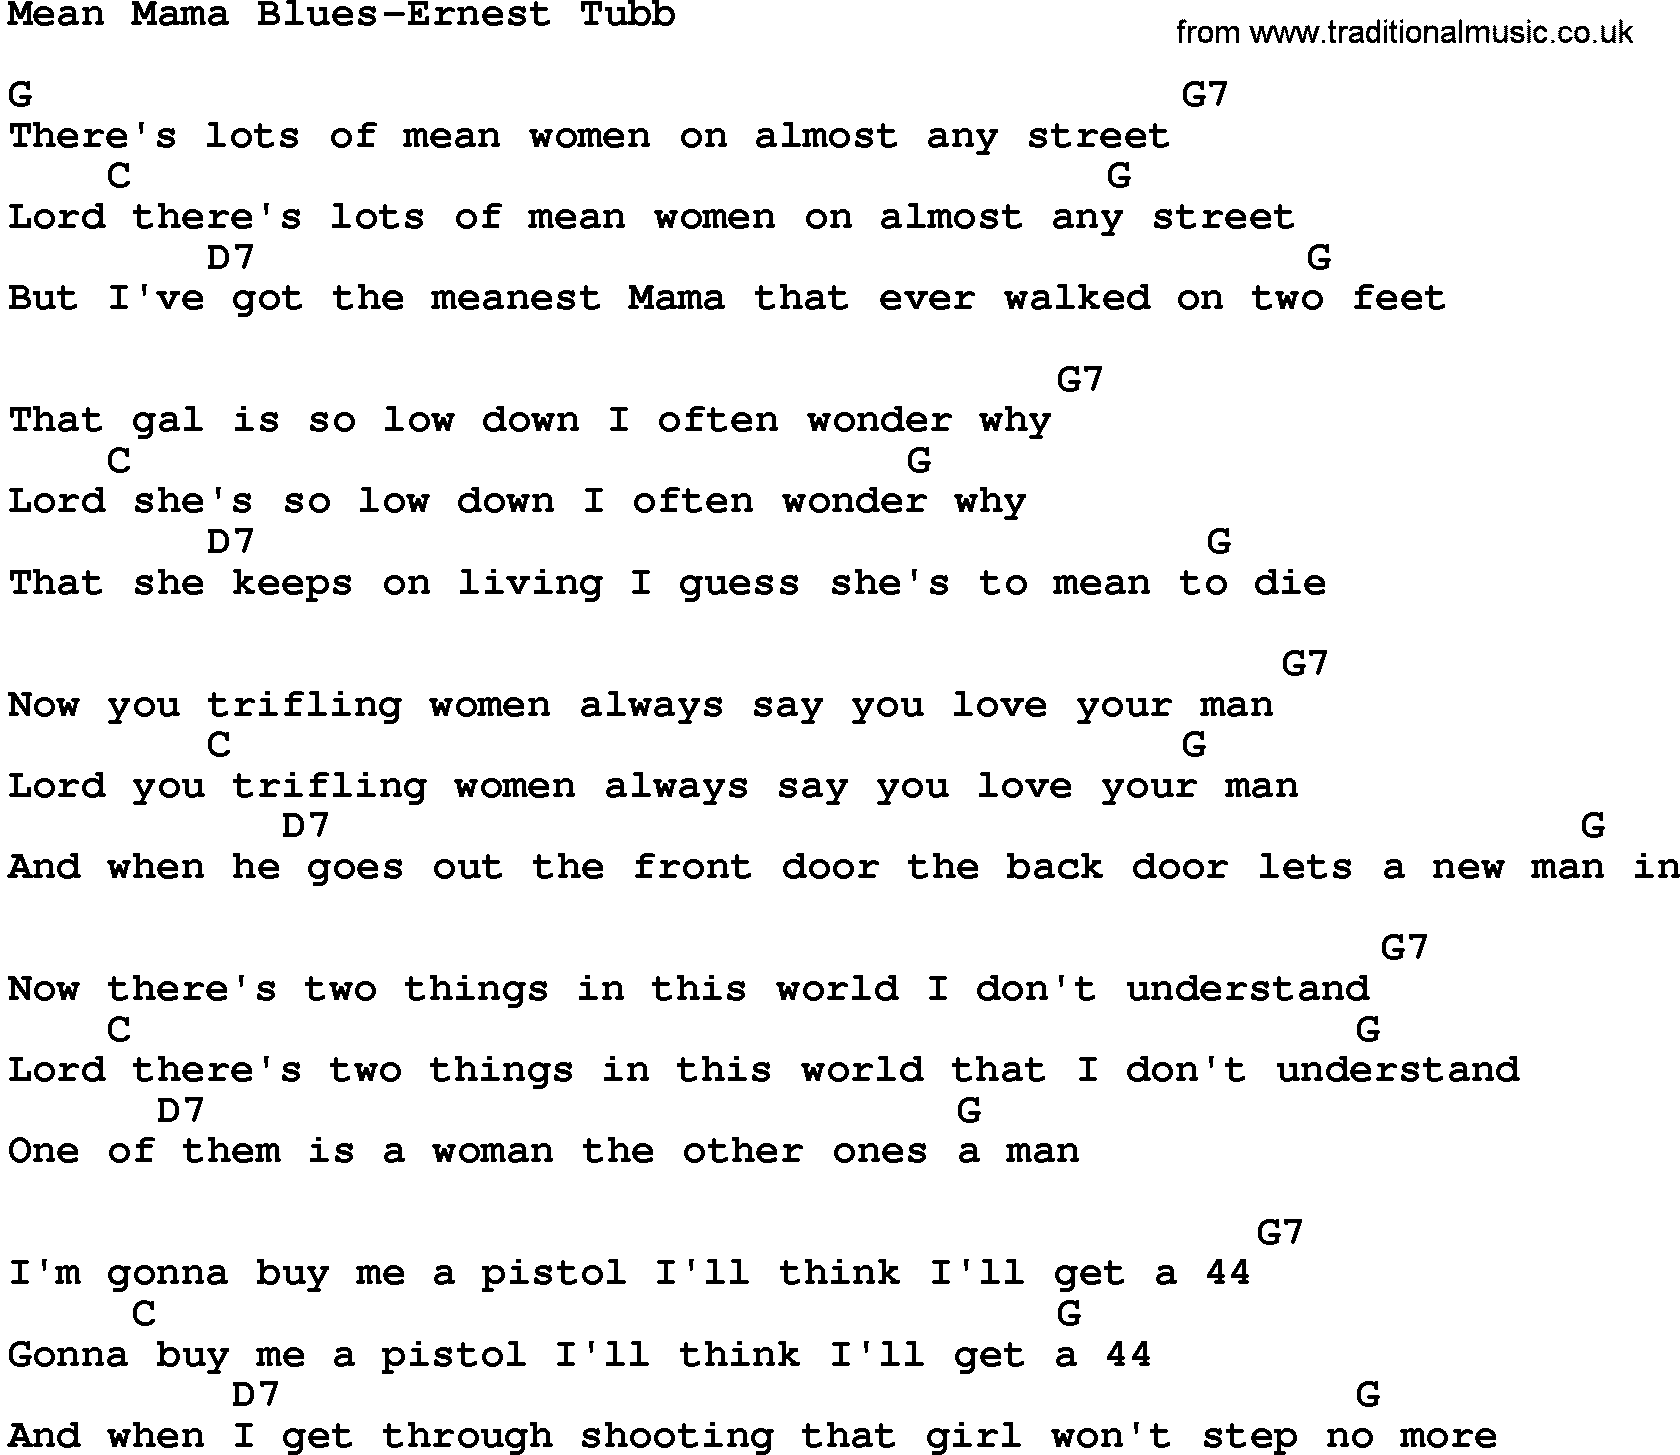 Country music song: Mean Mama Blues-Ernest Tubb lyrics and chords